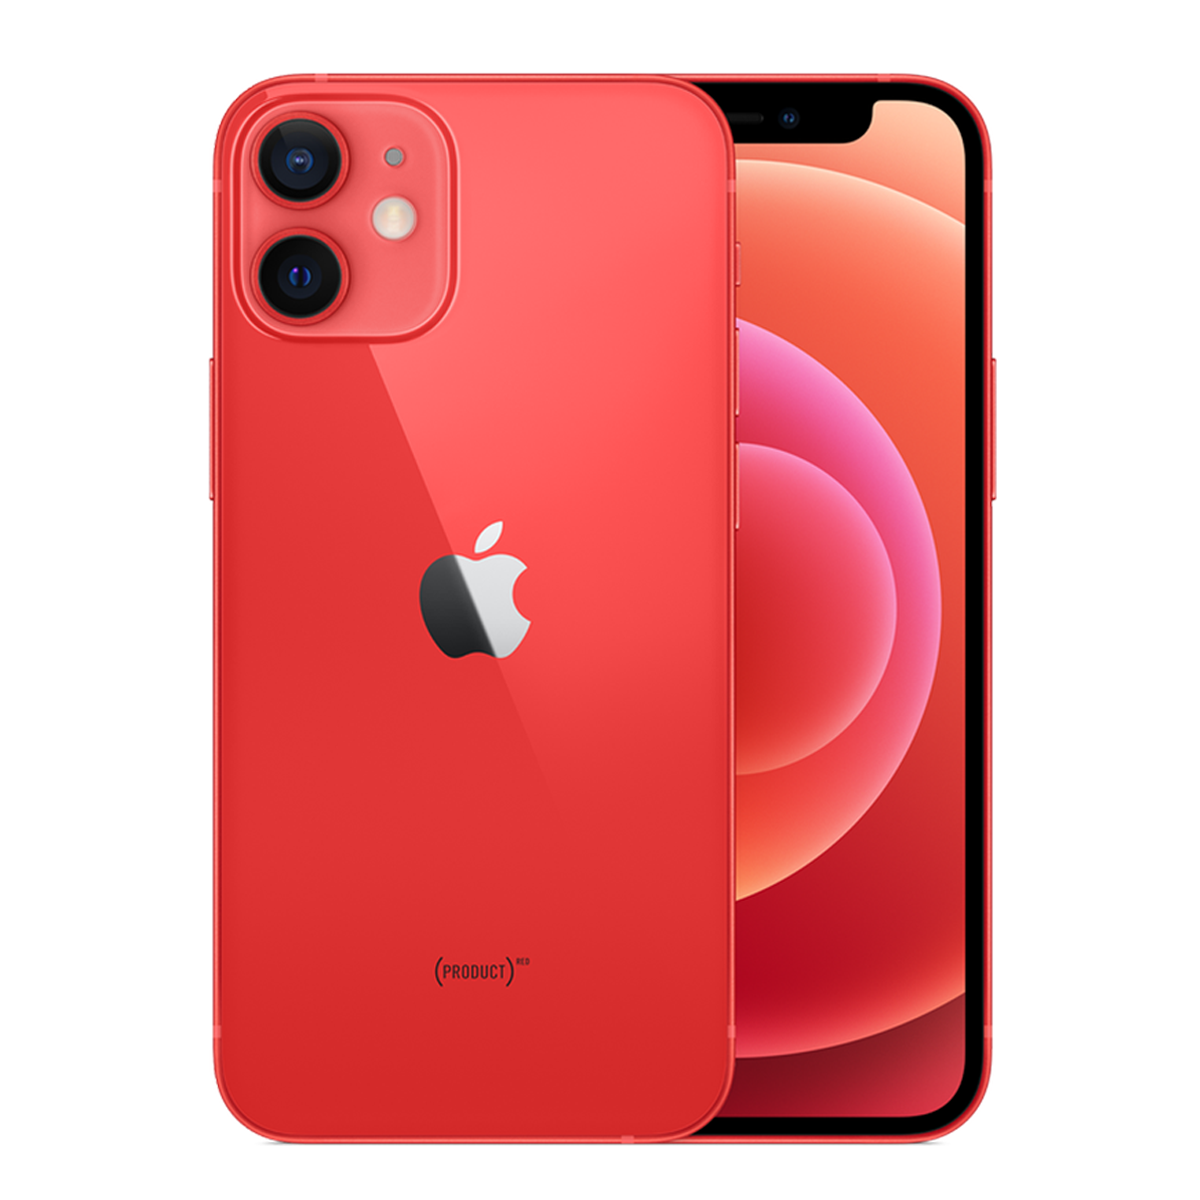 iPhone 12 mini, (PRODUCT)Red, 128GB (Official Stock)